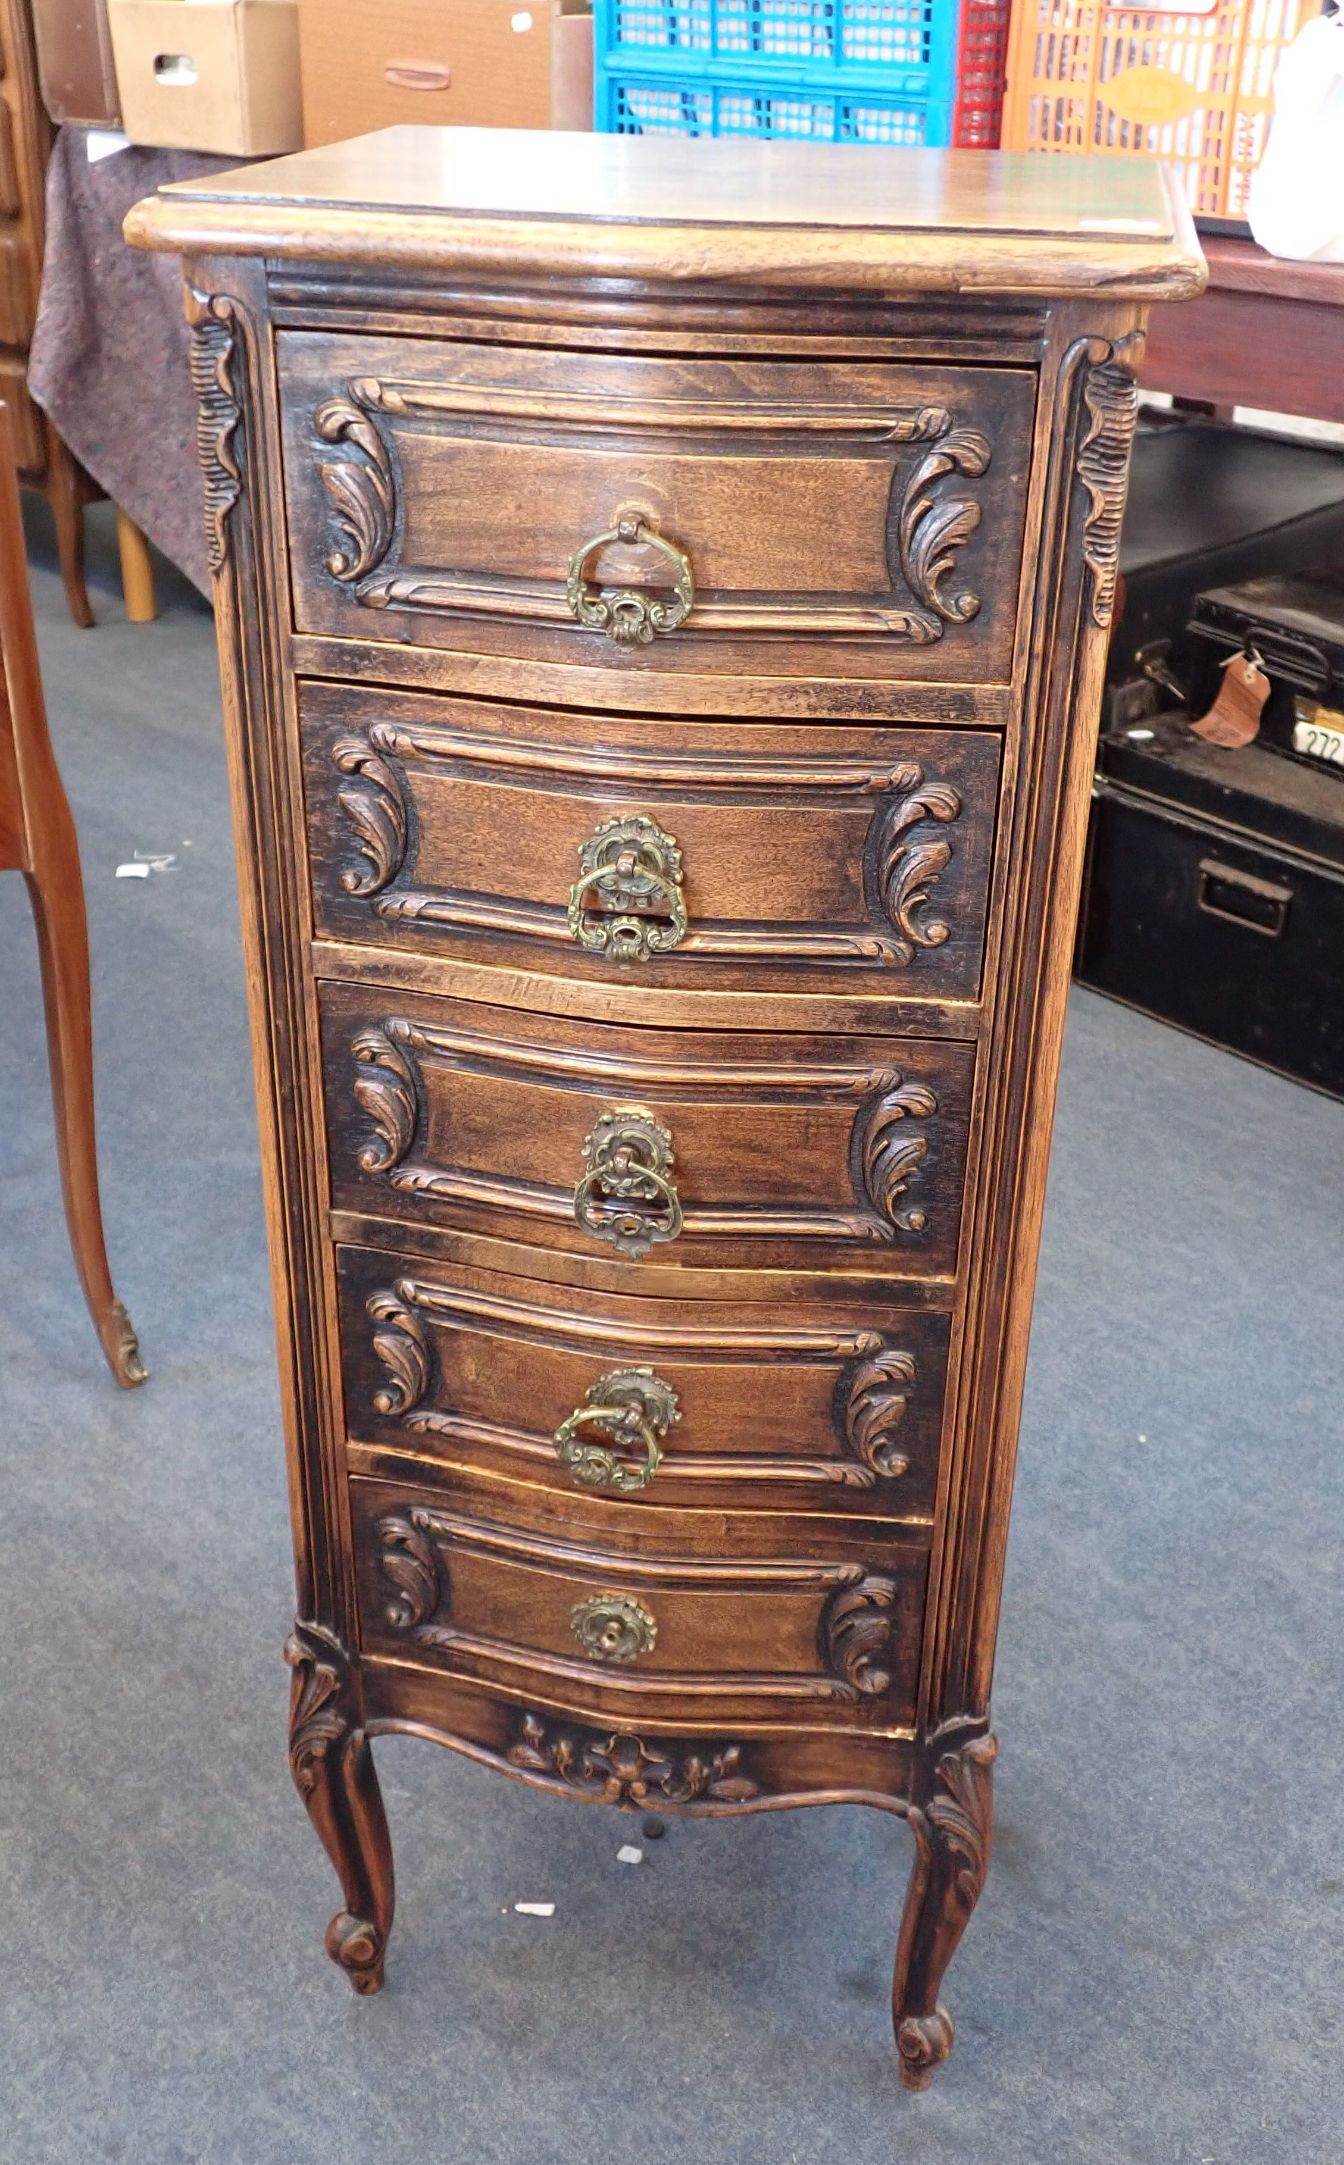 A FRENCH PROVINCIAL STYLE CARVED OAK CHEST OF DRAWERS